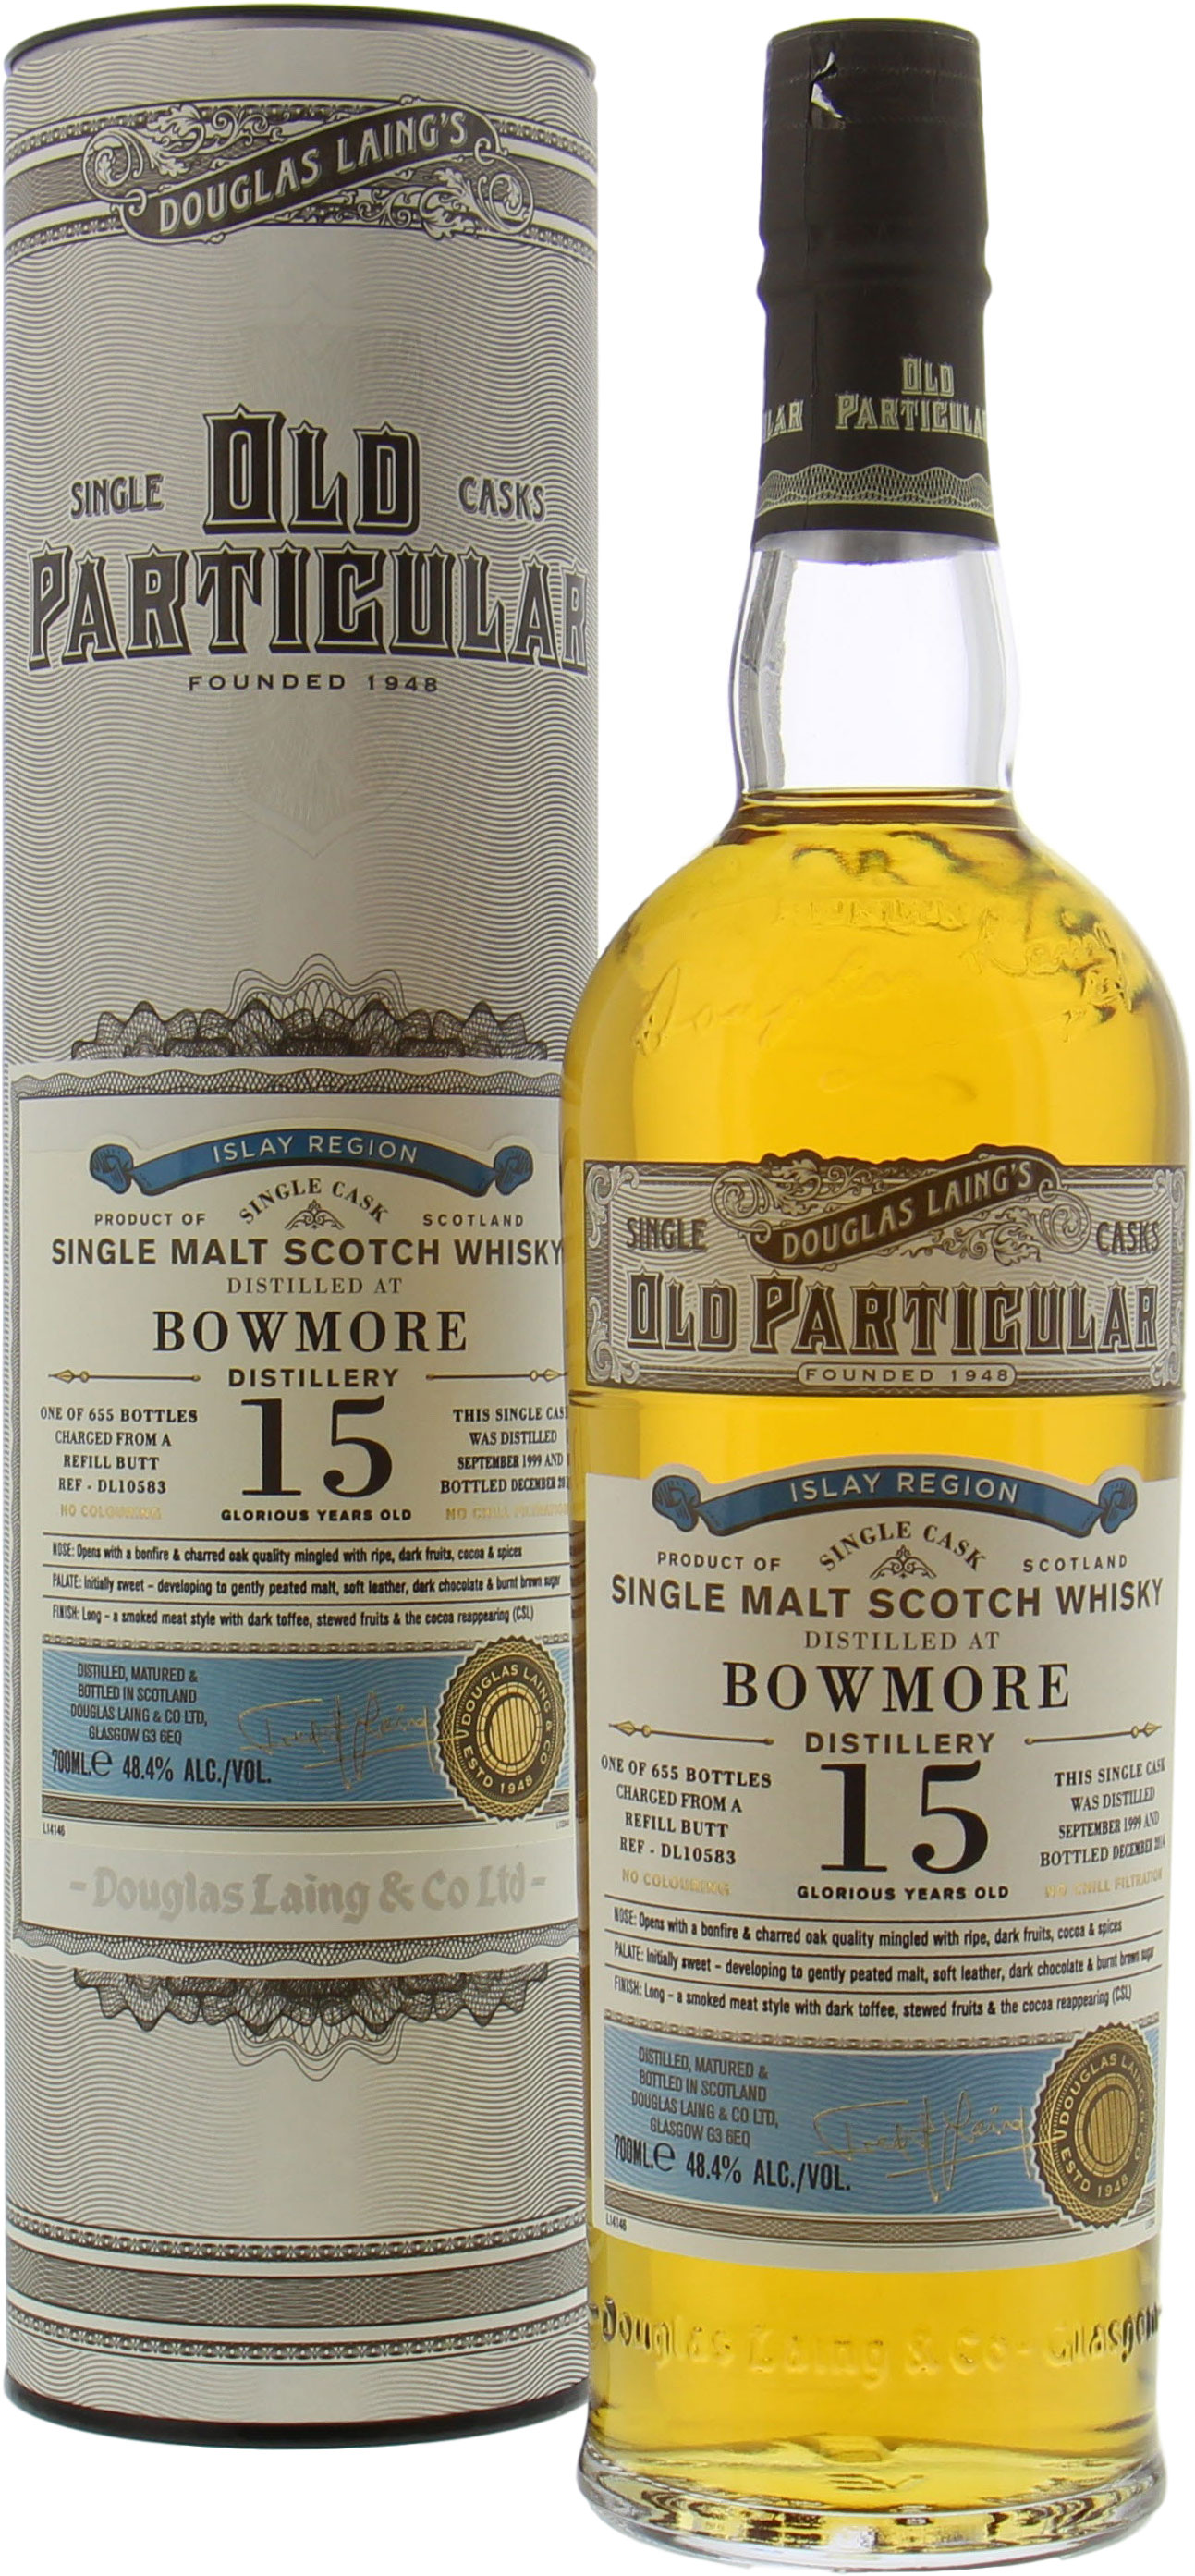 Bowmore - 15 Years Old Douglas Laing Cask:DL10583 48.4% 1999